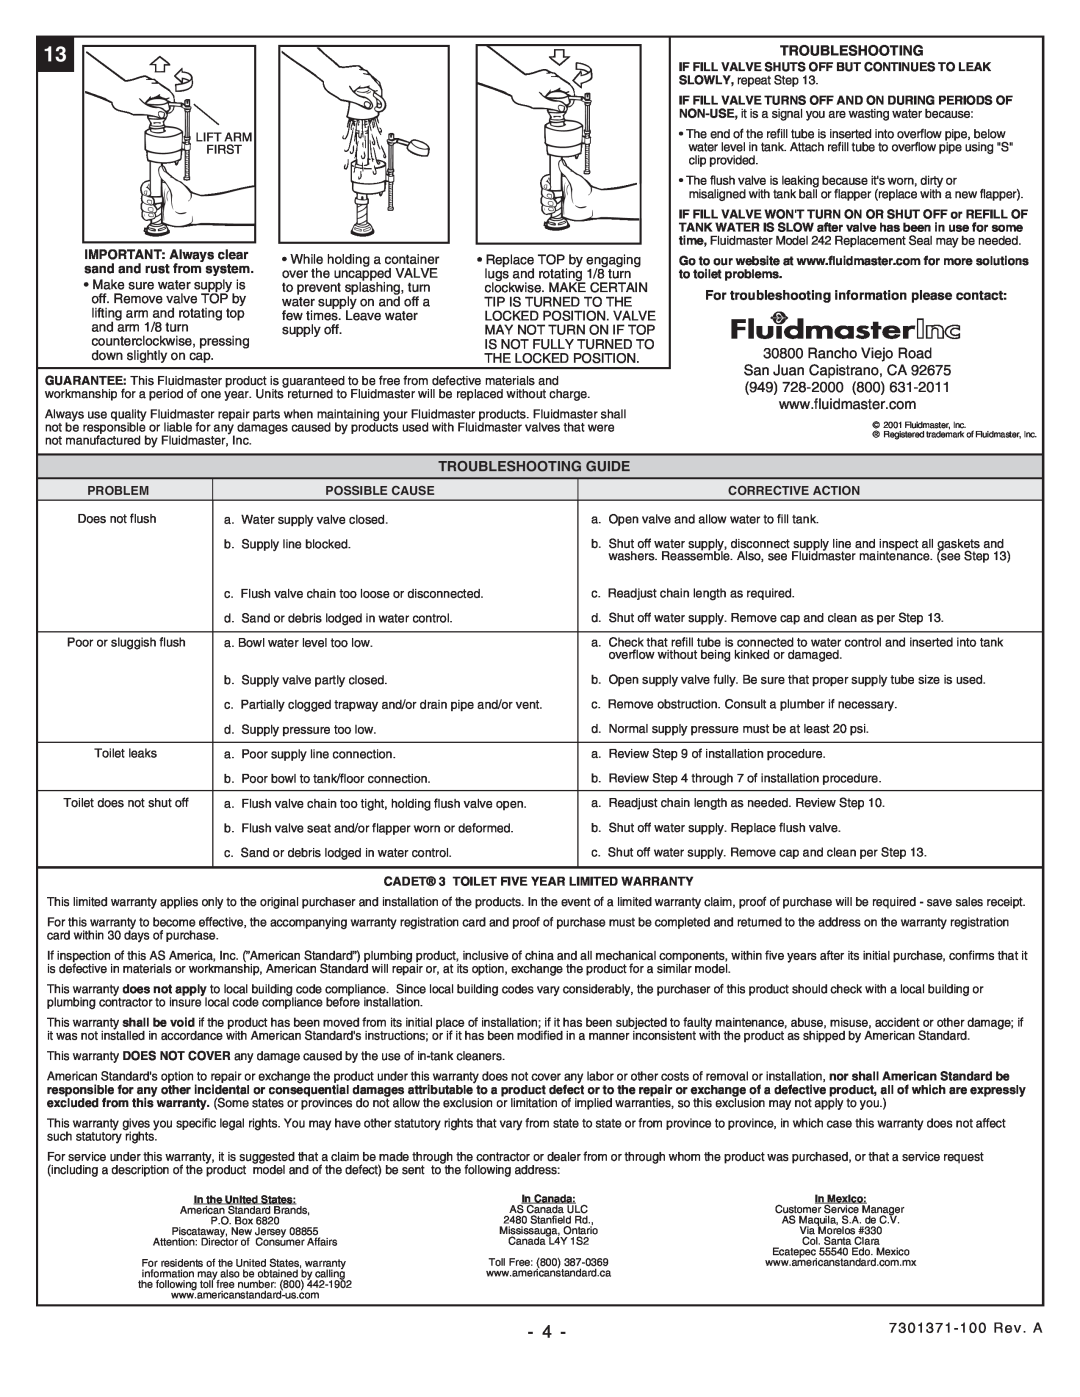 American Standard 2587 Troubleshooting Guide, For troubleshooting information please contact, Problem, Possible Cause 